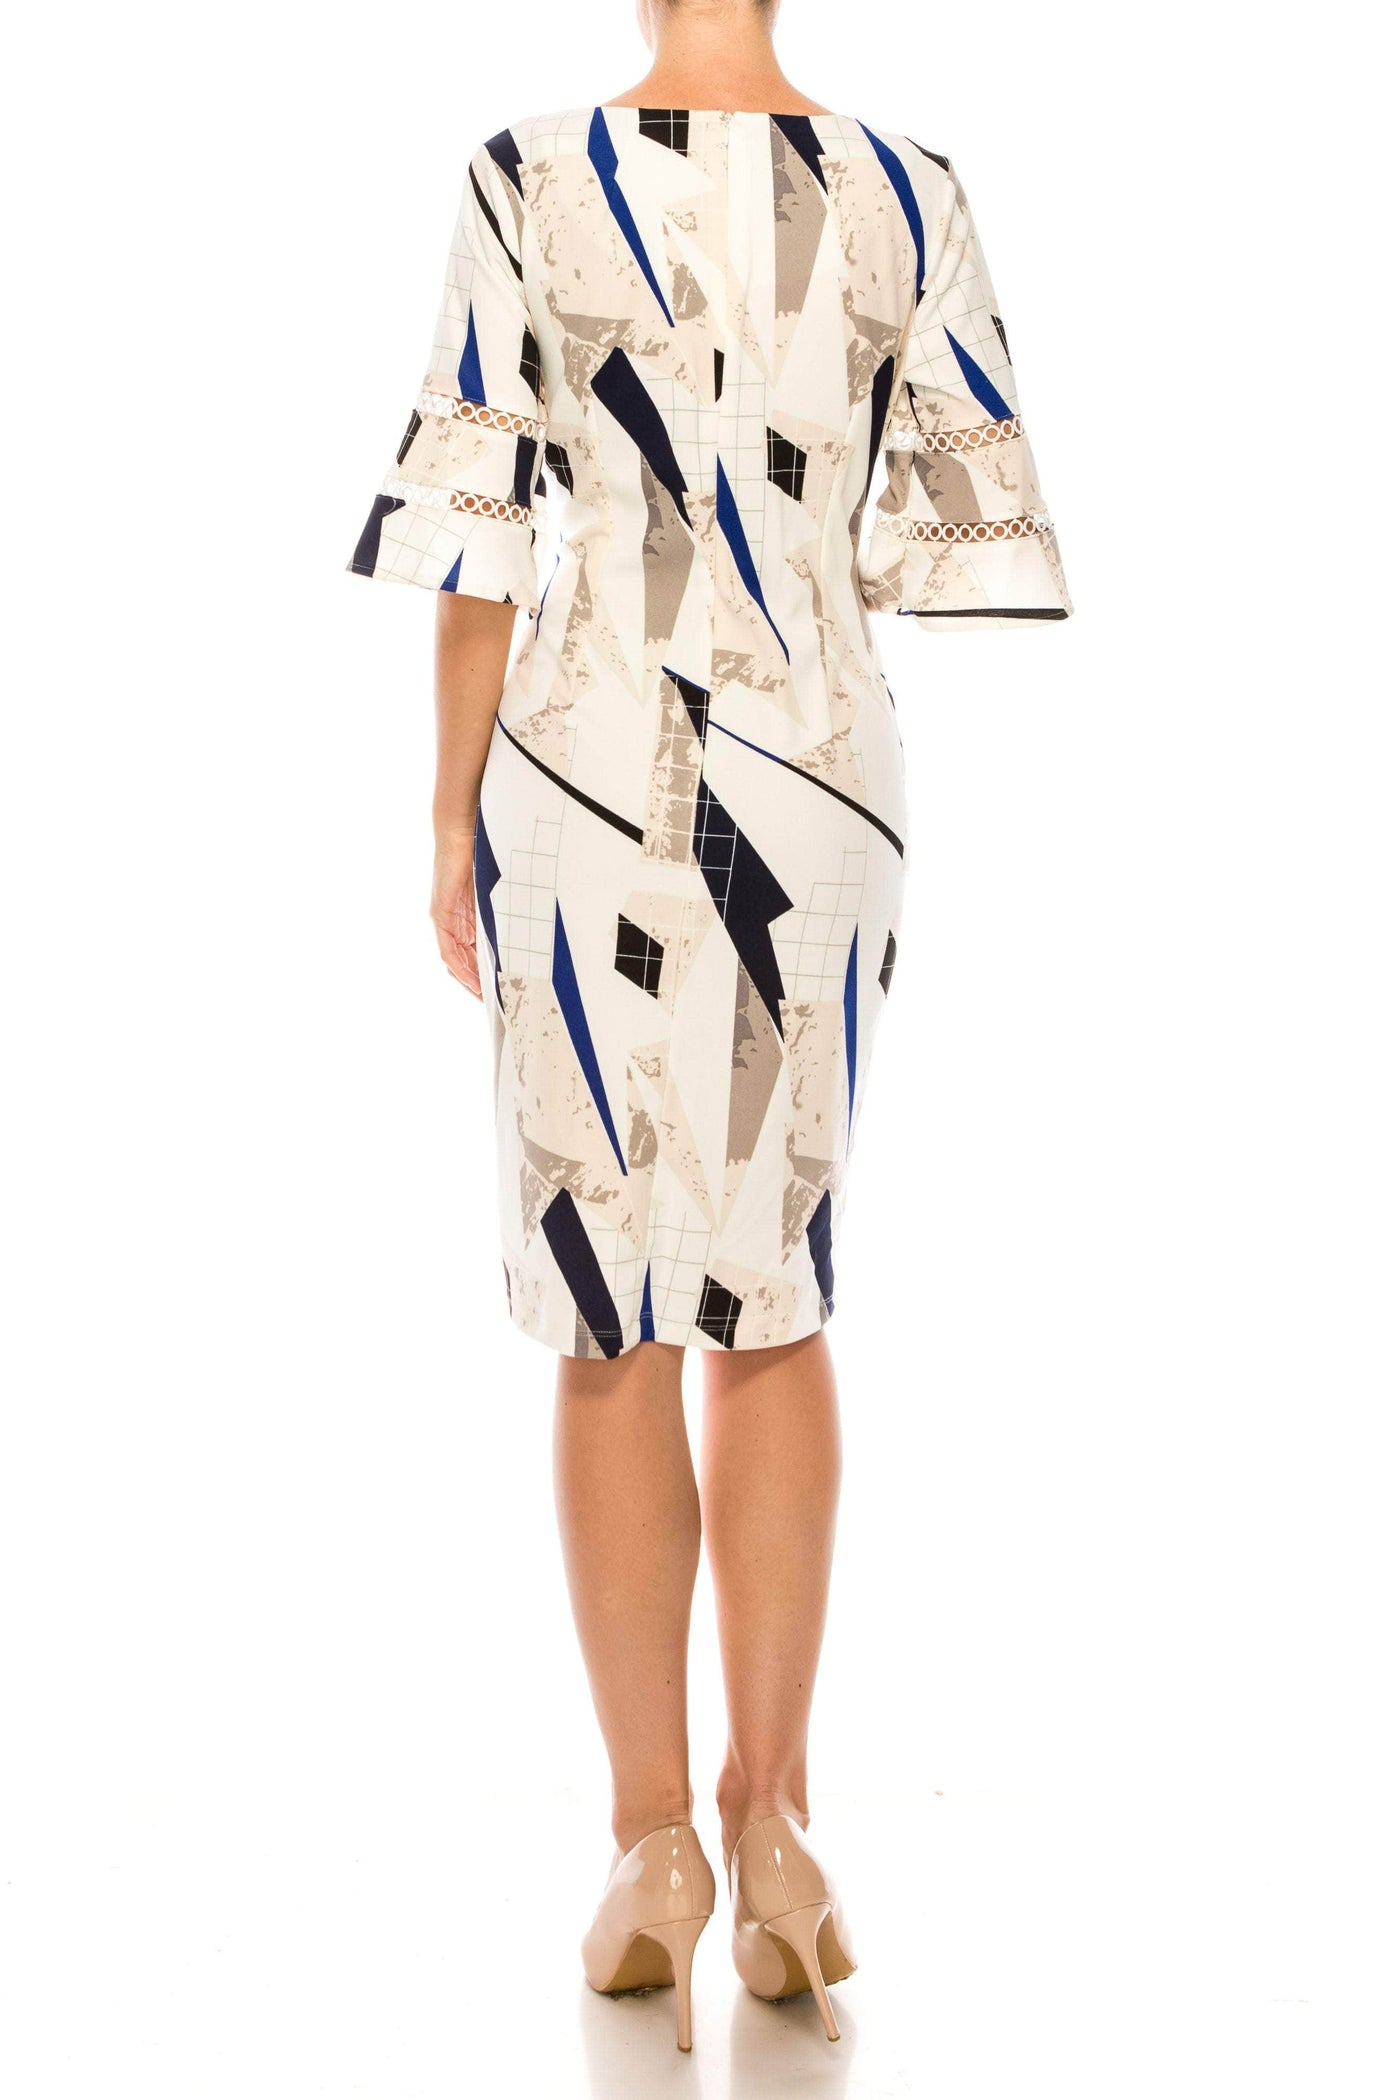 ILE Clothing SCP5901RE - Bell Sleeve Print Dress Special Occasion Dresses